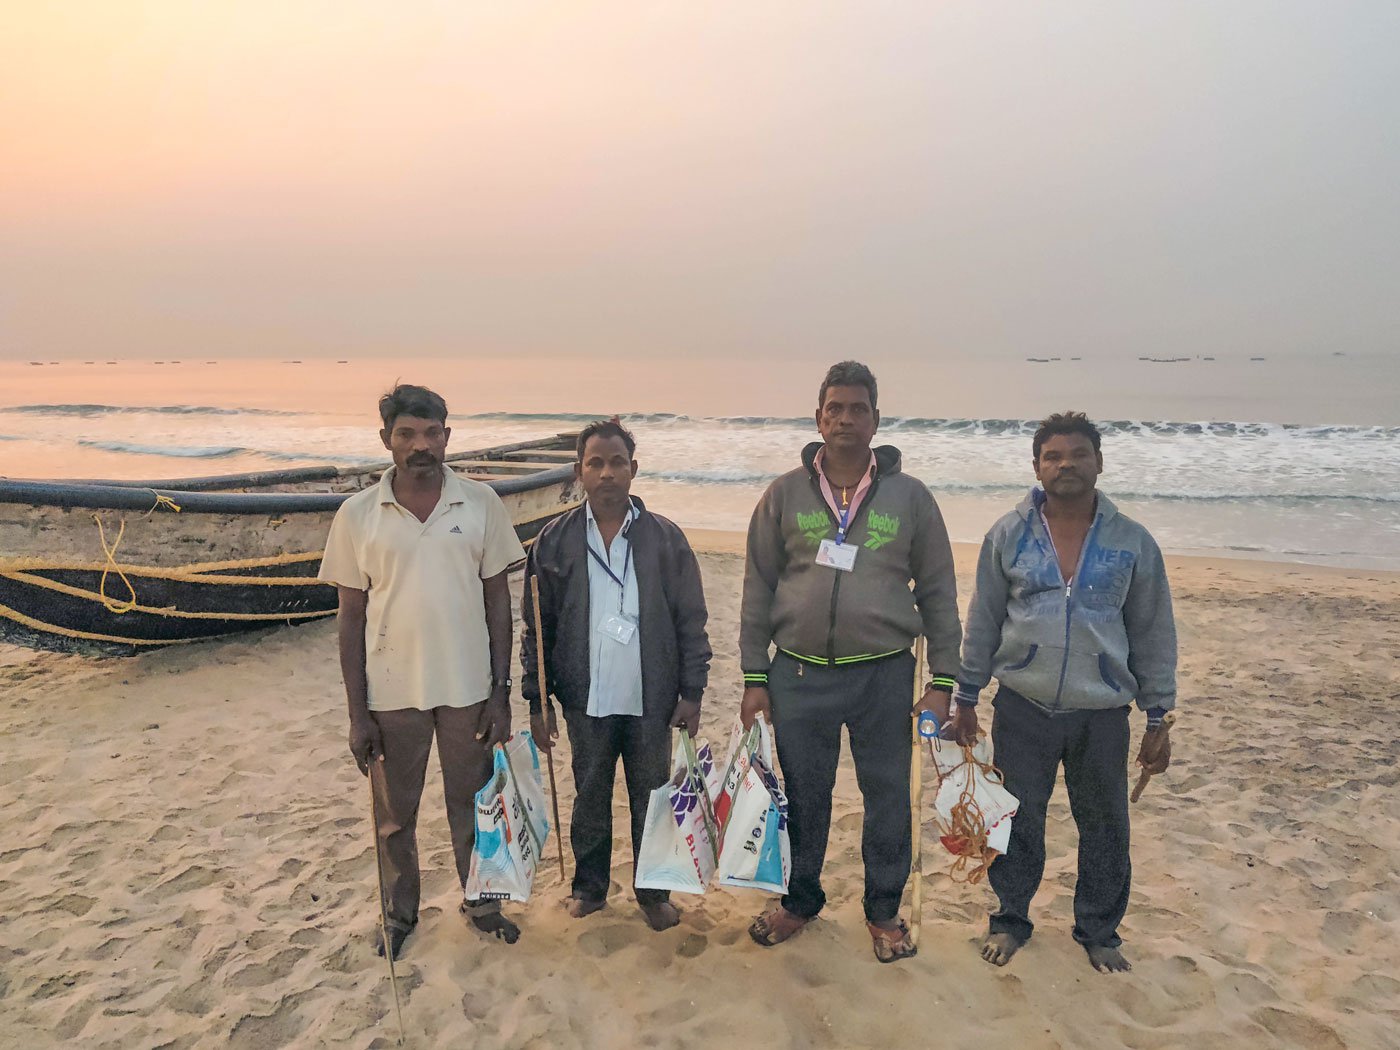 Left to right: Ramolu Lakshmayya, Karri Jallibabu, Puttiyapana Yerranna, and Pulla Polarao are fishermen who also work as guards at a hatchery on RK Beach, Visakhapatnam where they are part of a team conserving the endangered Olive Ridley turtle at risk from climate change and loss of habitats.